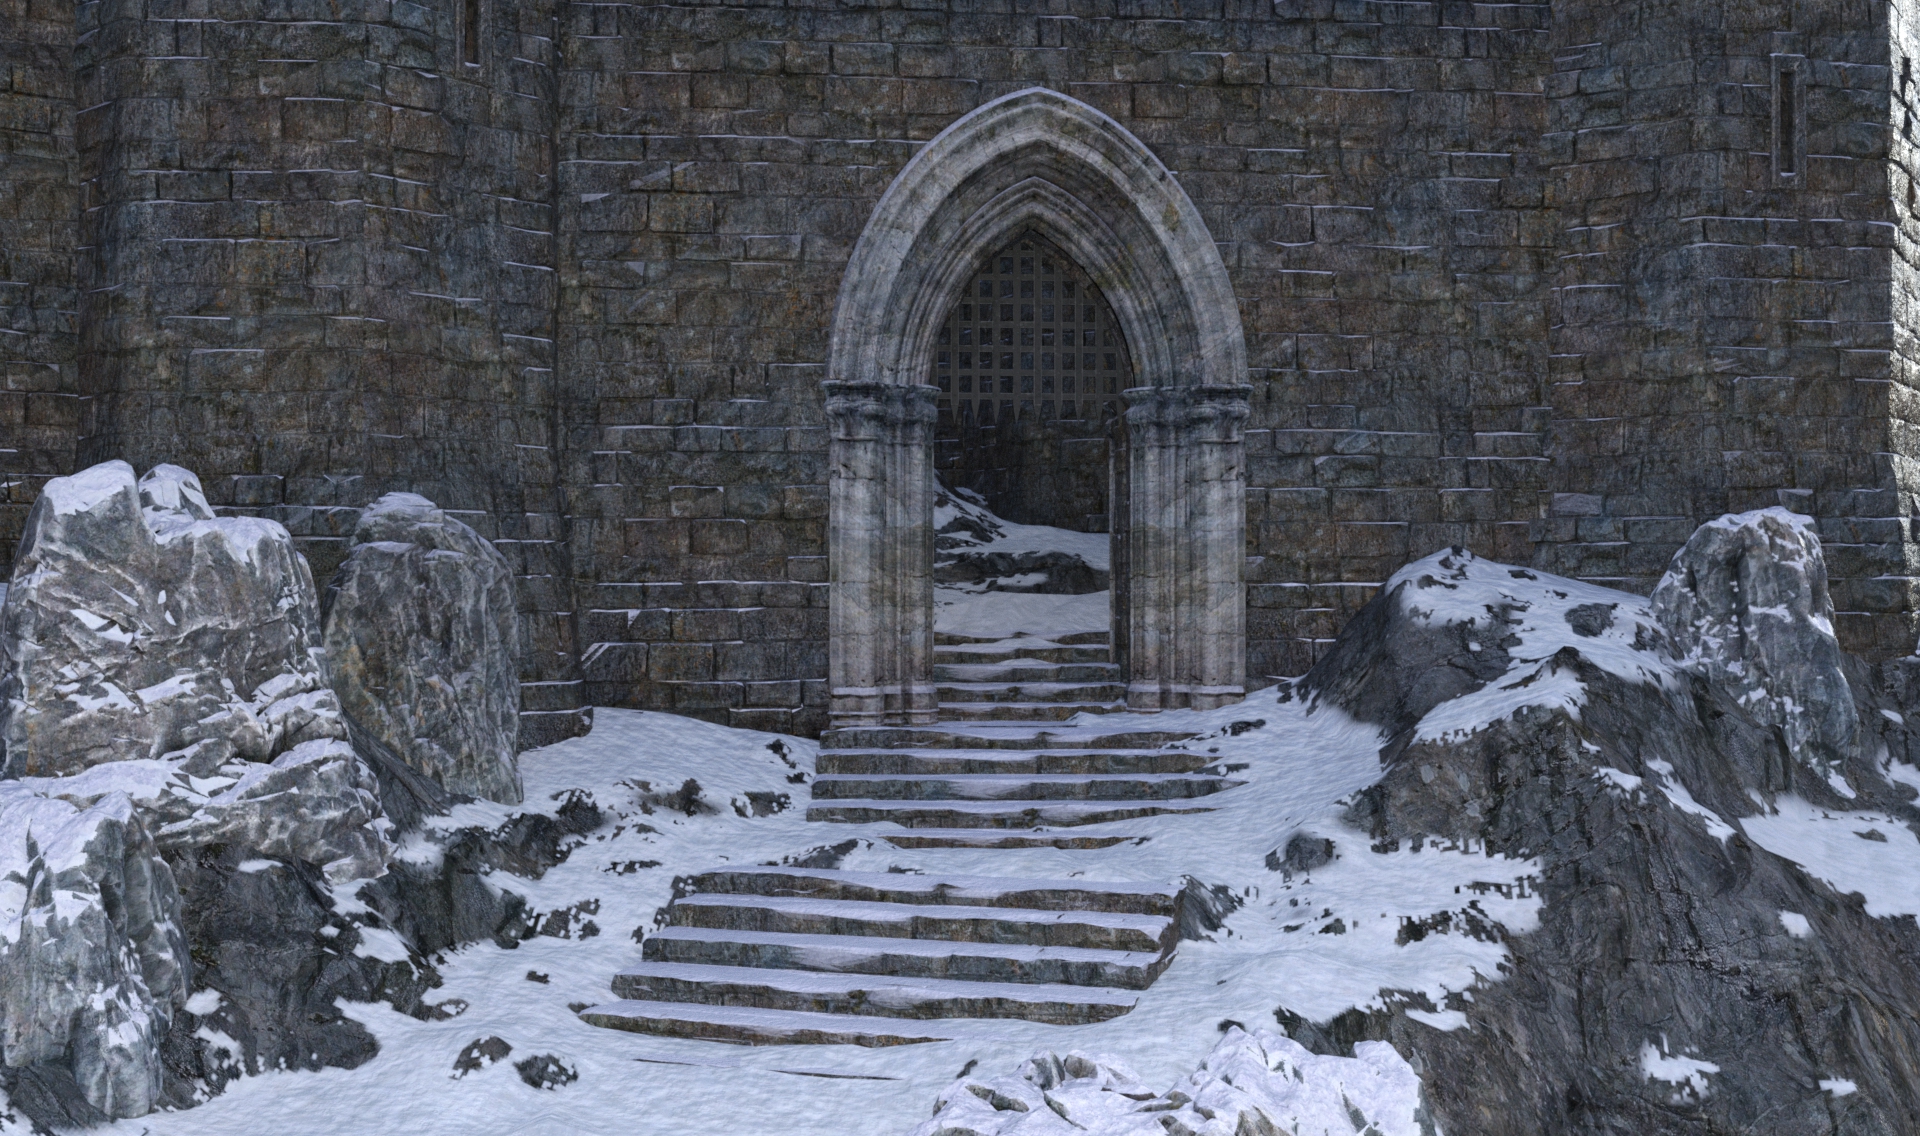 EXT. CASTLE SNOWY ENTRANCE – DAY